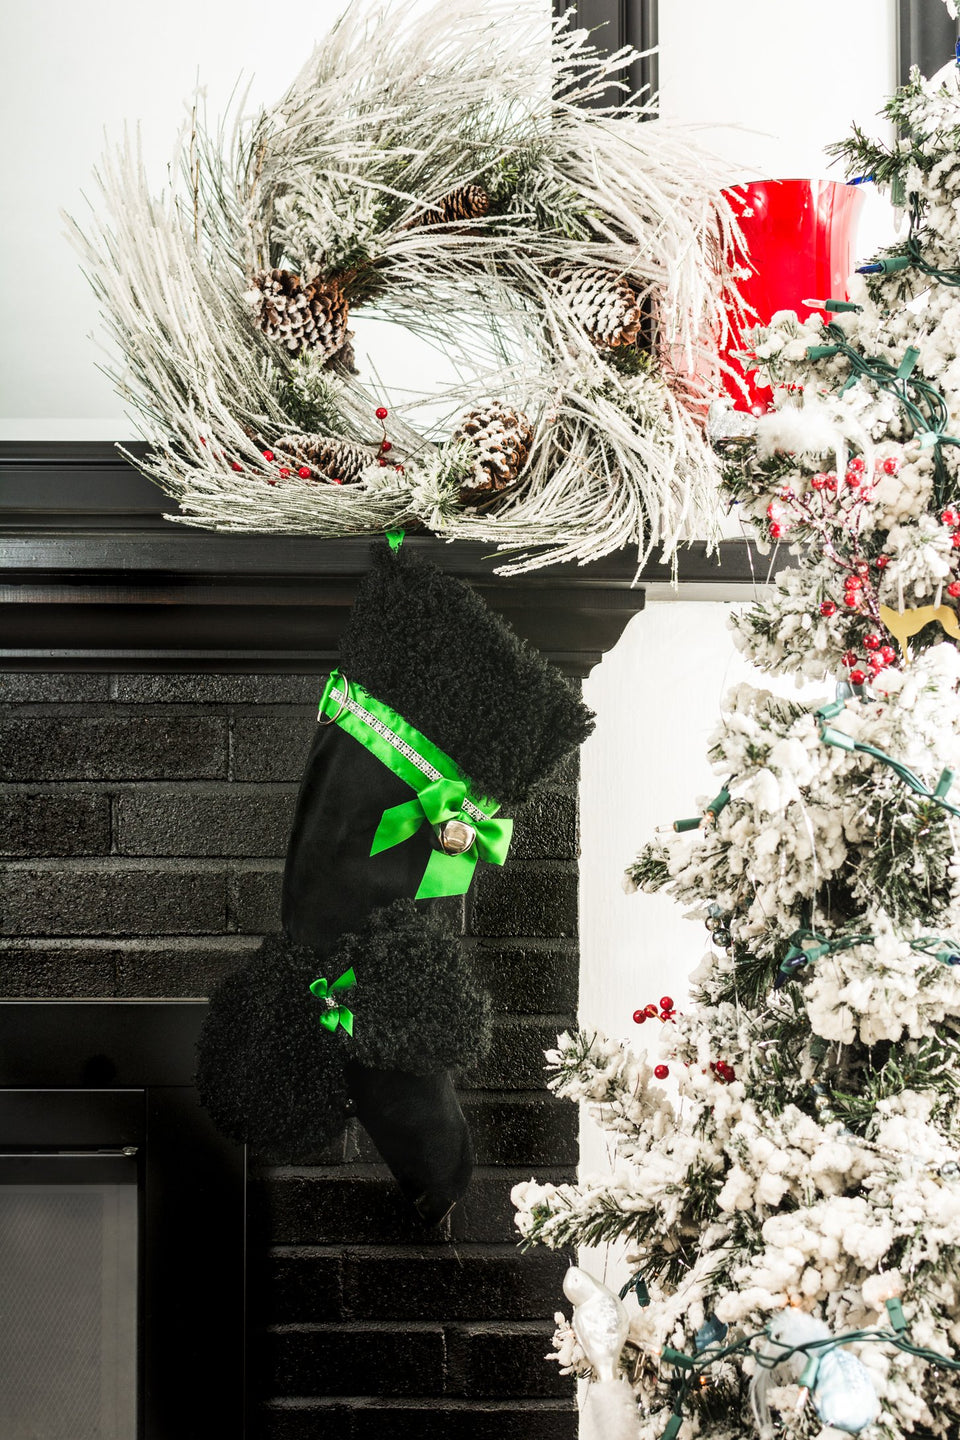 This Black Poodle shaped dog Christmas stocking is the perfect gift for stuffing toys and treats into to spoil your fur baby for Christmas, or whatever holiday you celebrate!